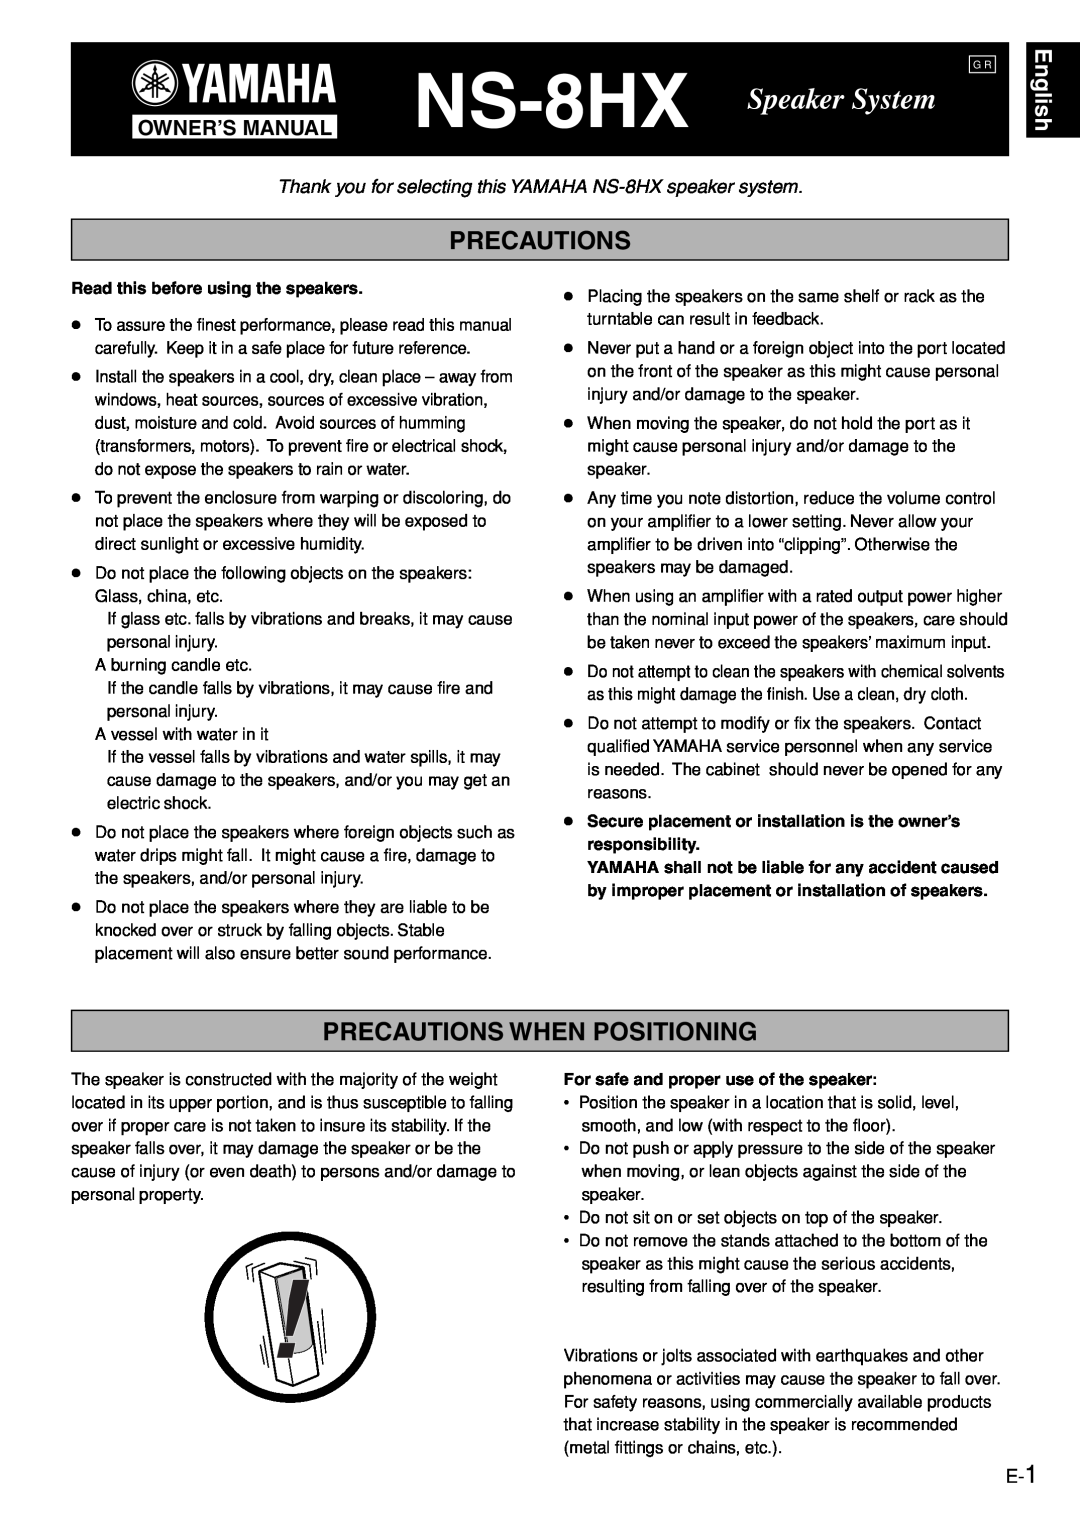 Yamaha NS-8HX owner manual Precautions When Positioning, English, Read this before using the speakers 